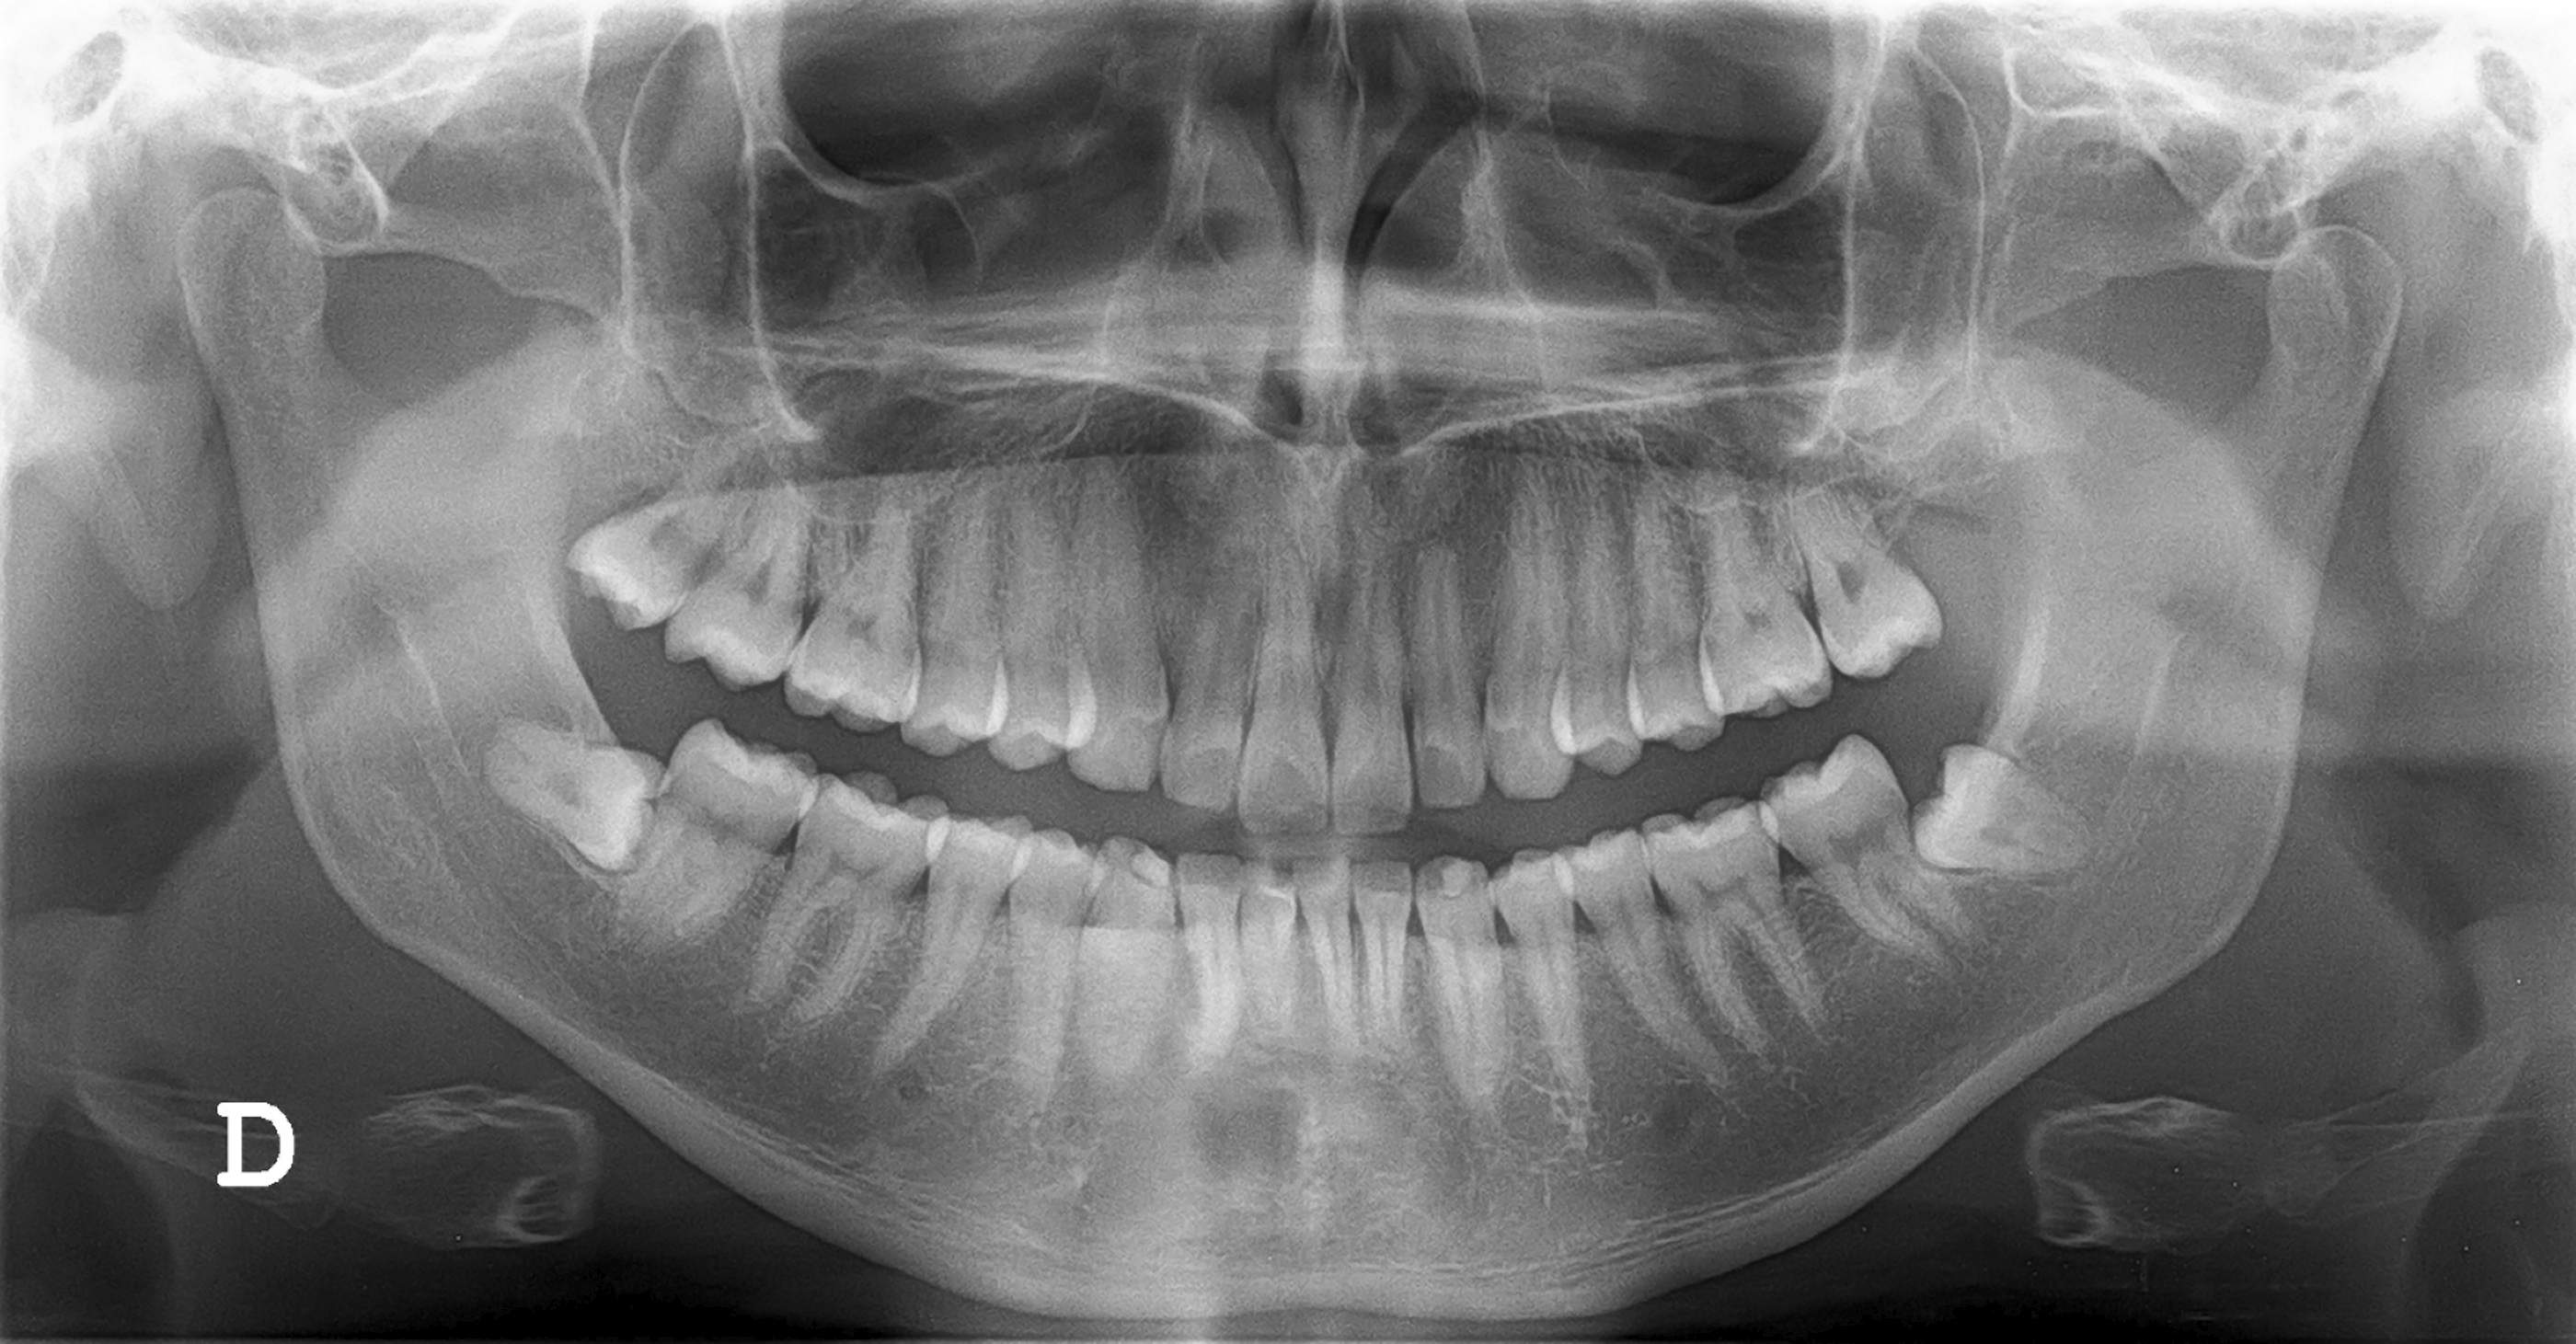 x-rays in dentistry